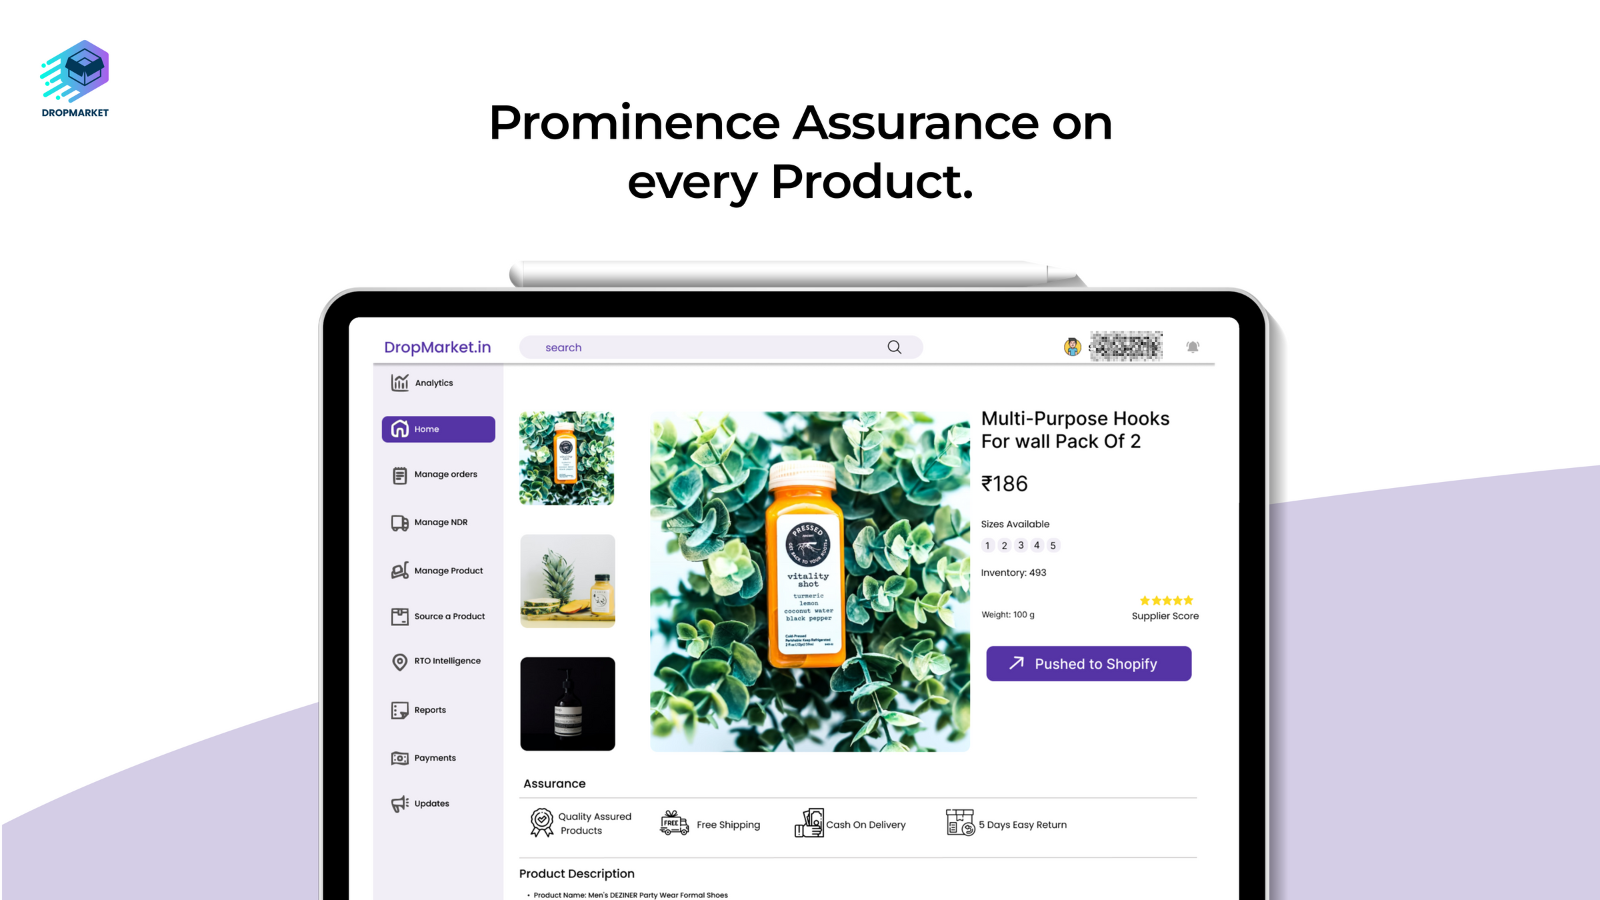 Push products to shopify.